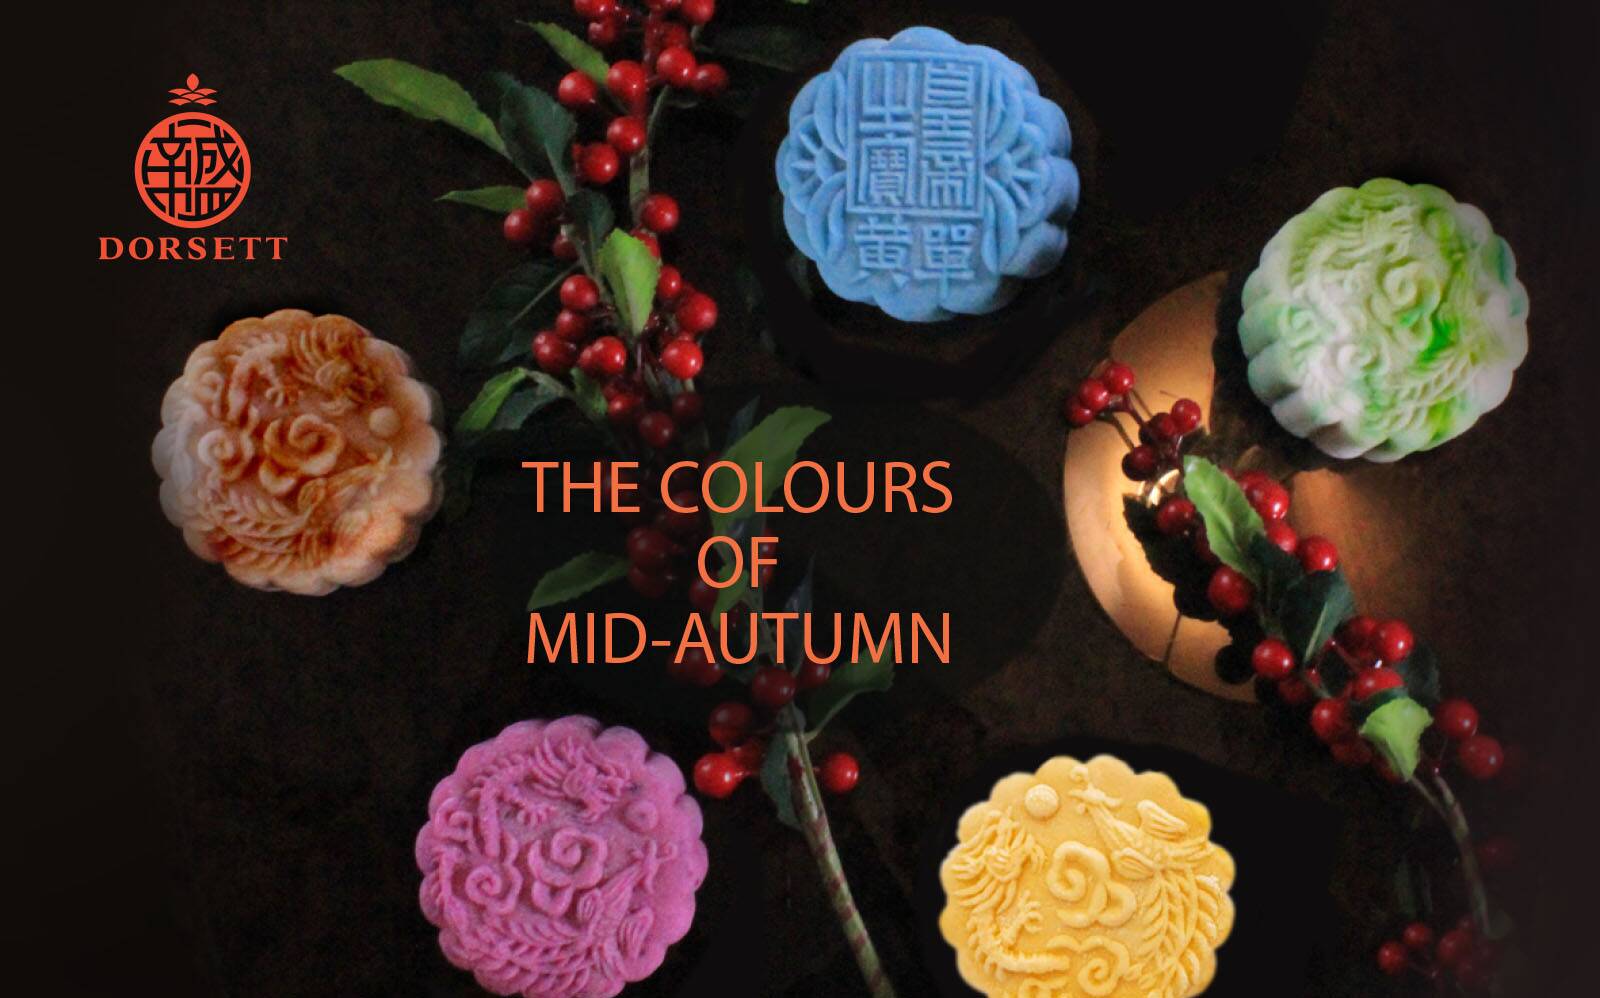 The Colours of Mid-Autumn